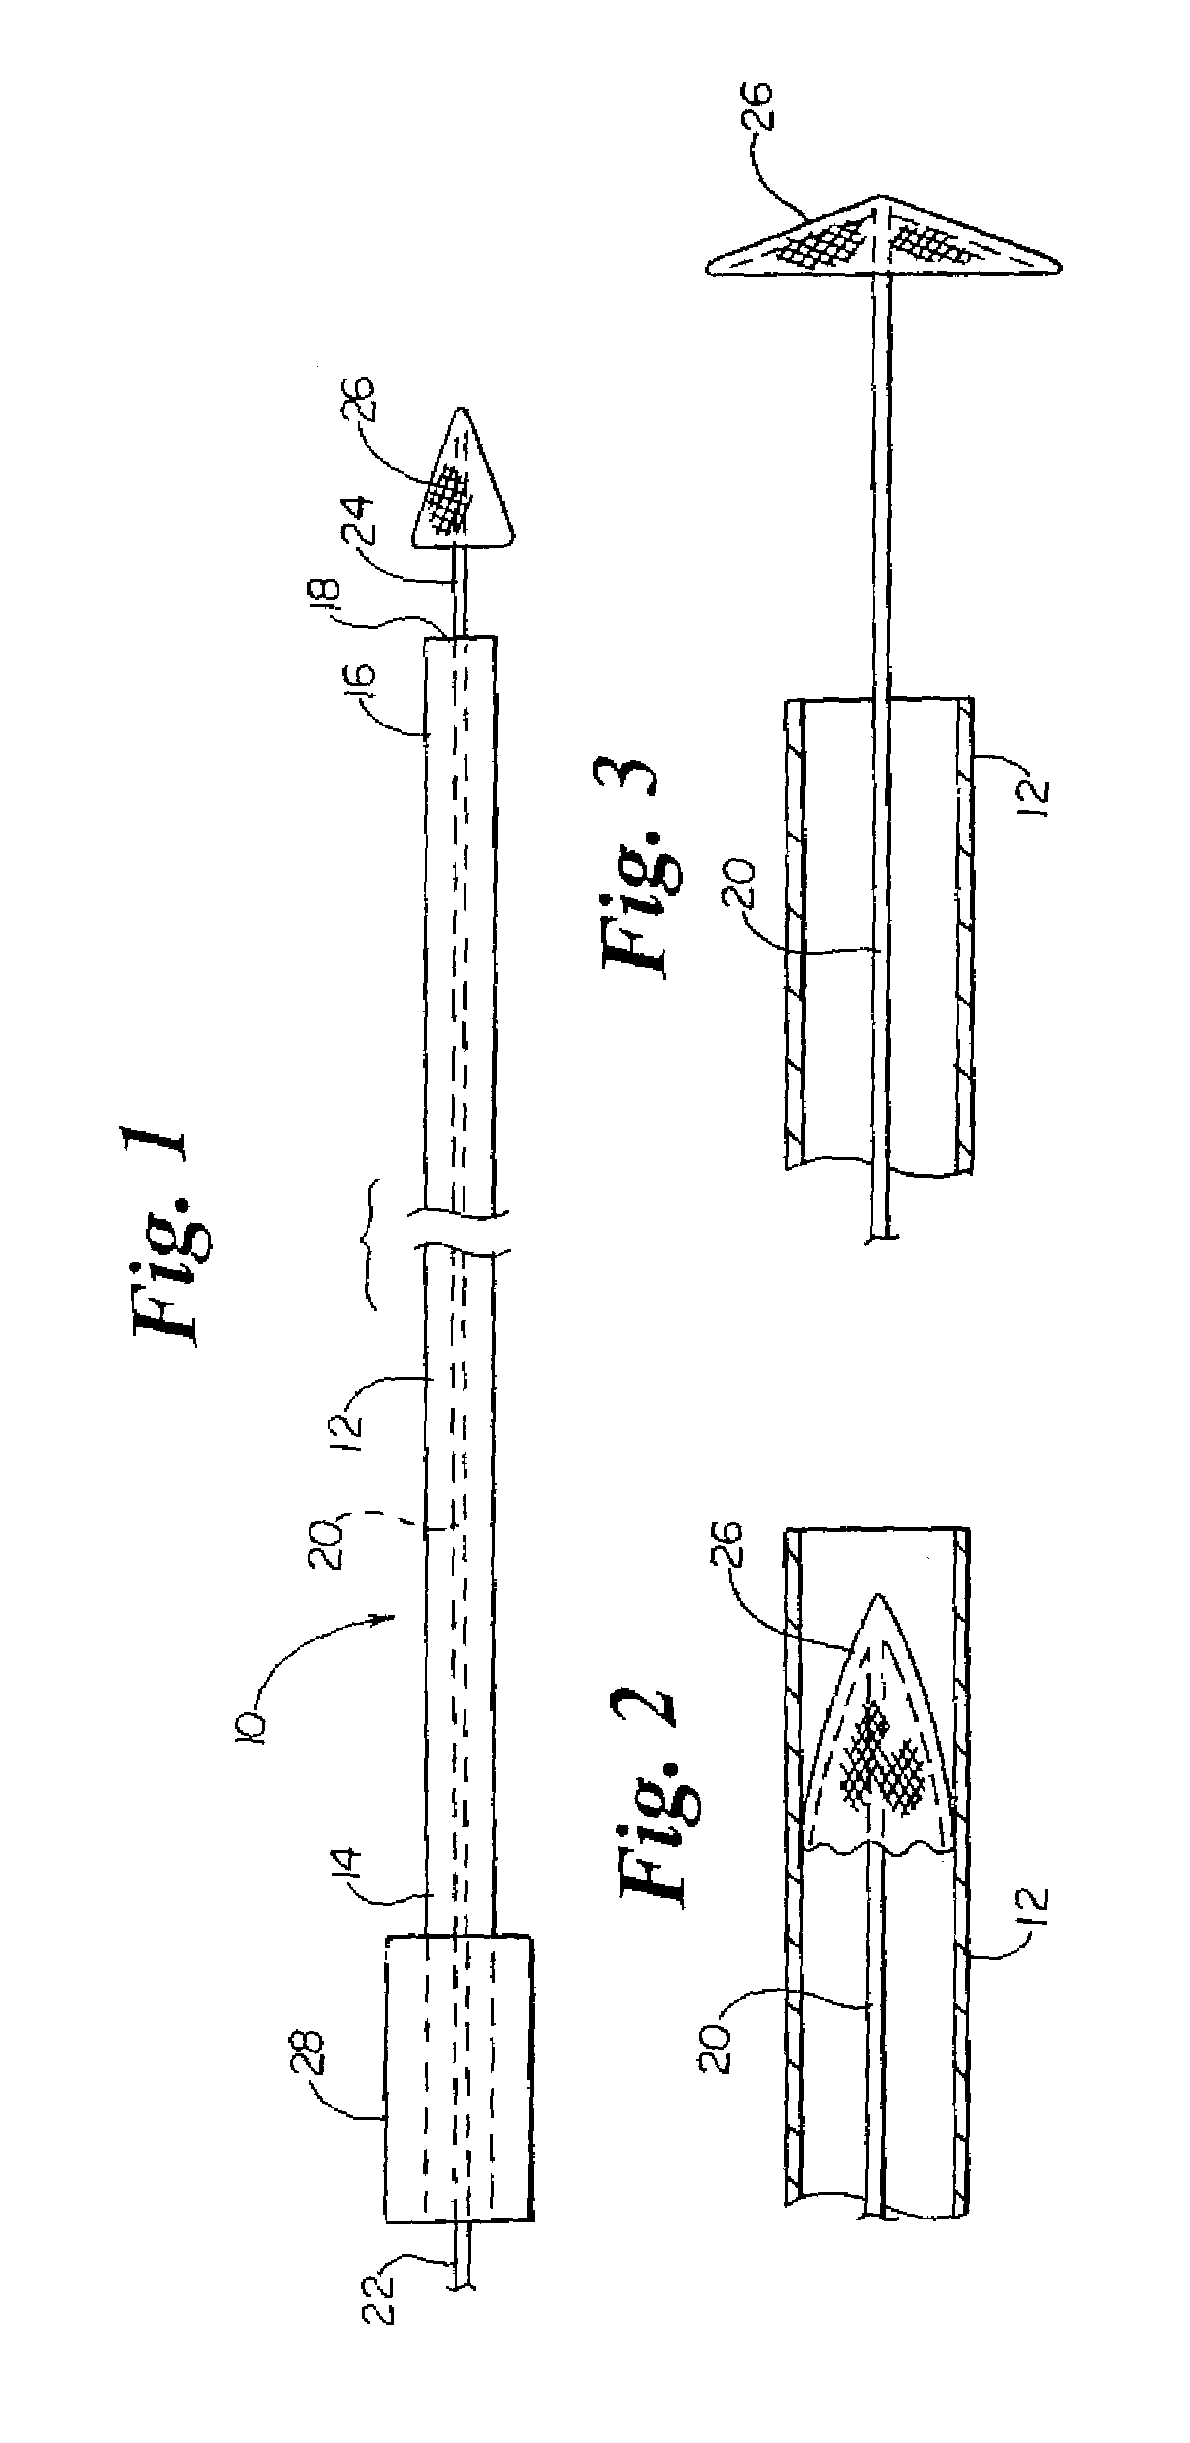 Delivery and retrieval manifold for a distal protection filter